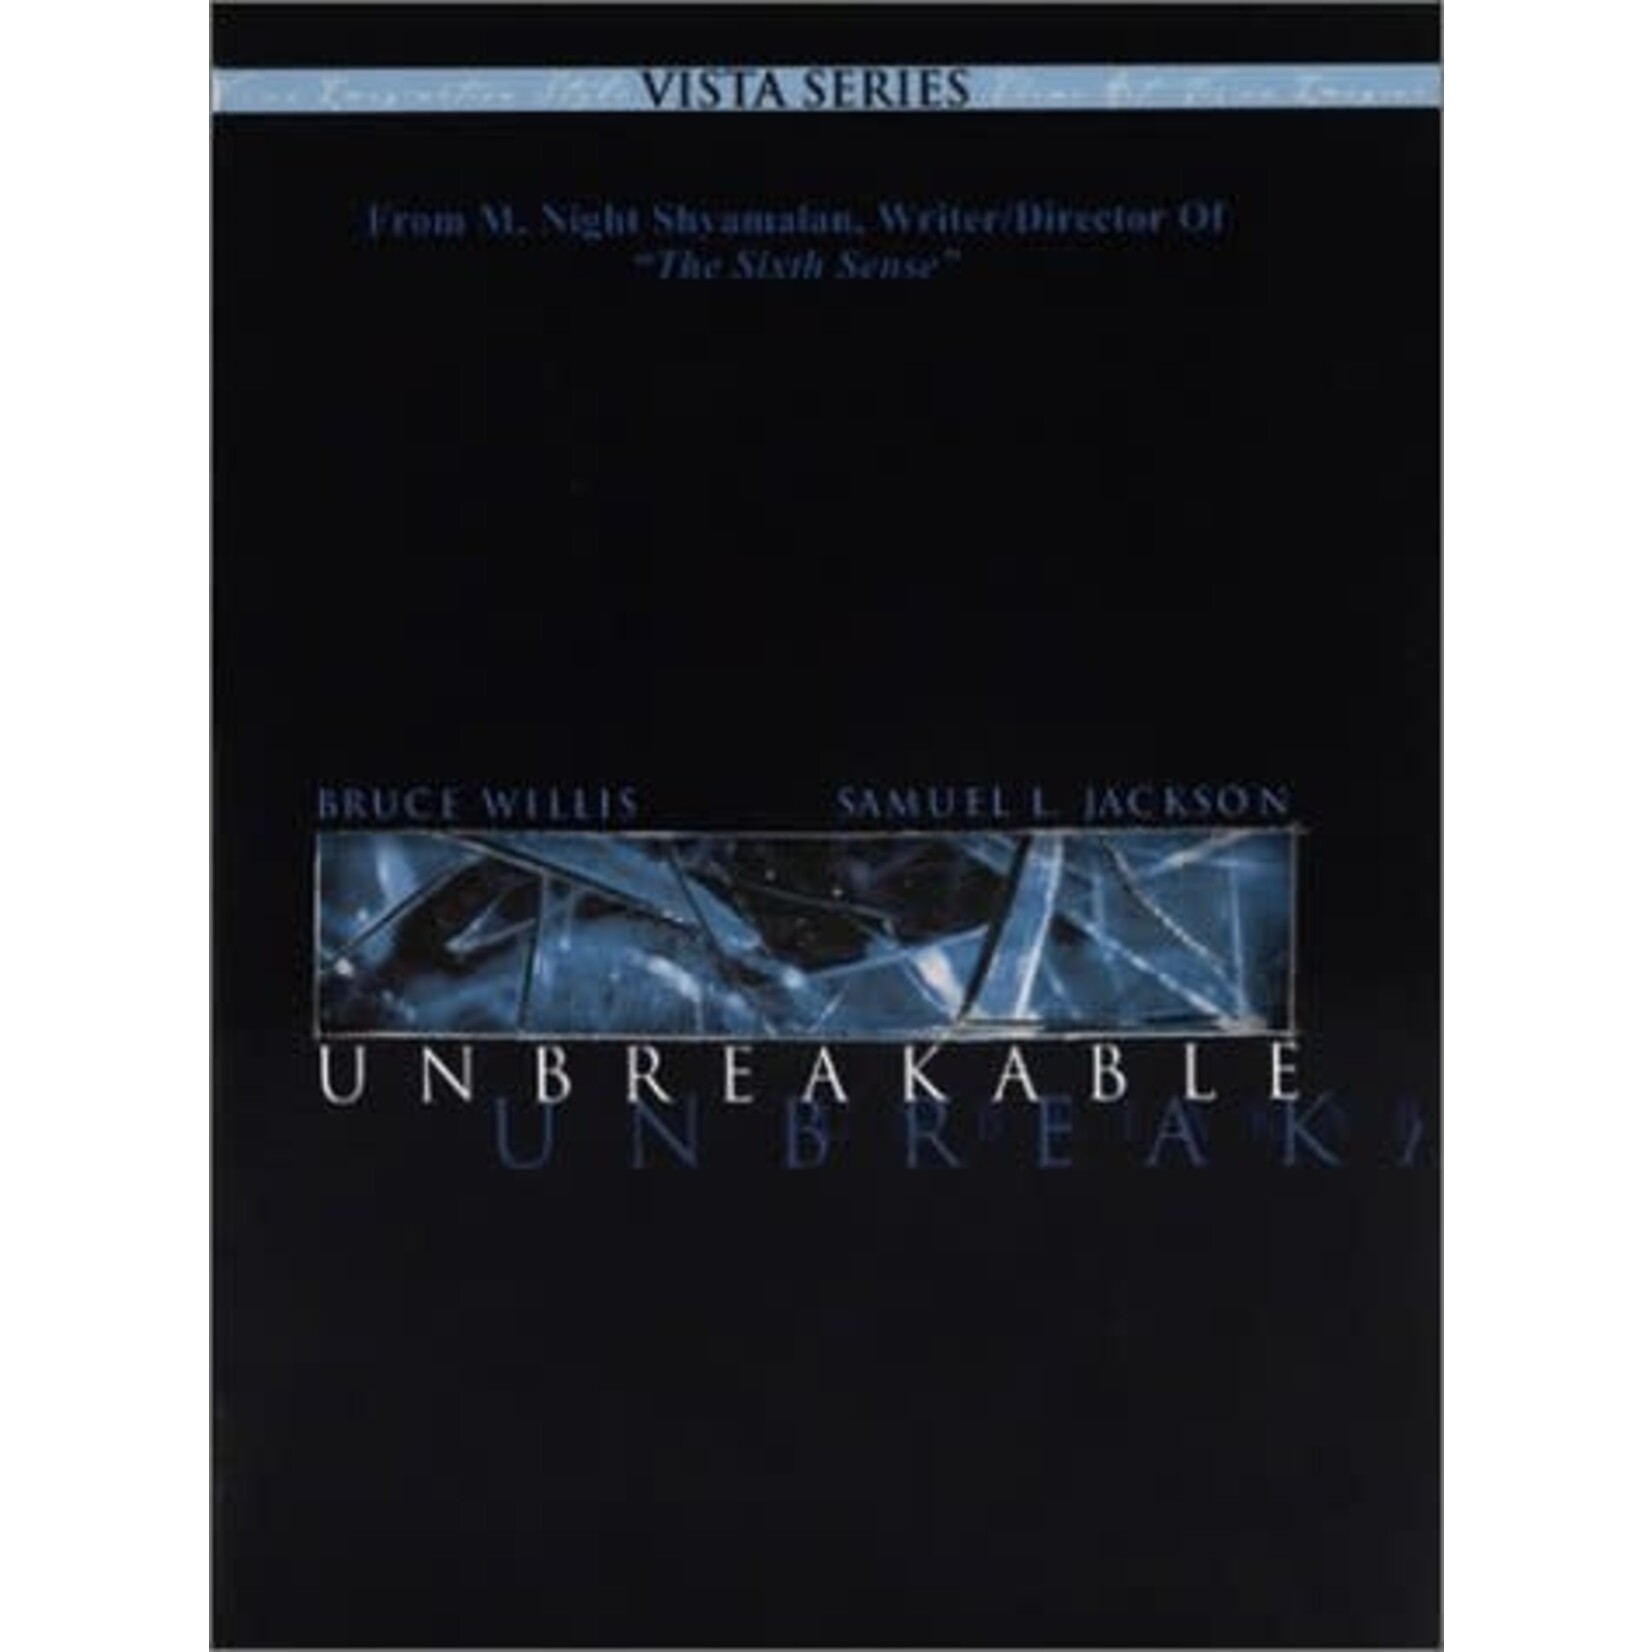 Eastrail 177 Trilogy - Unbreakable (2000) (Vista Series) [USED 2DVD]